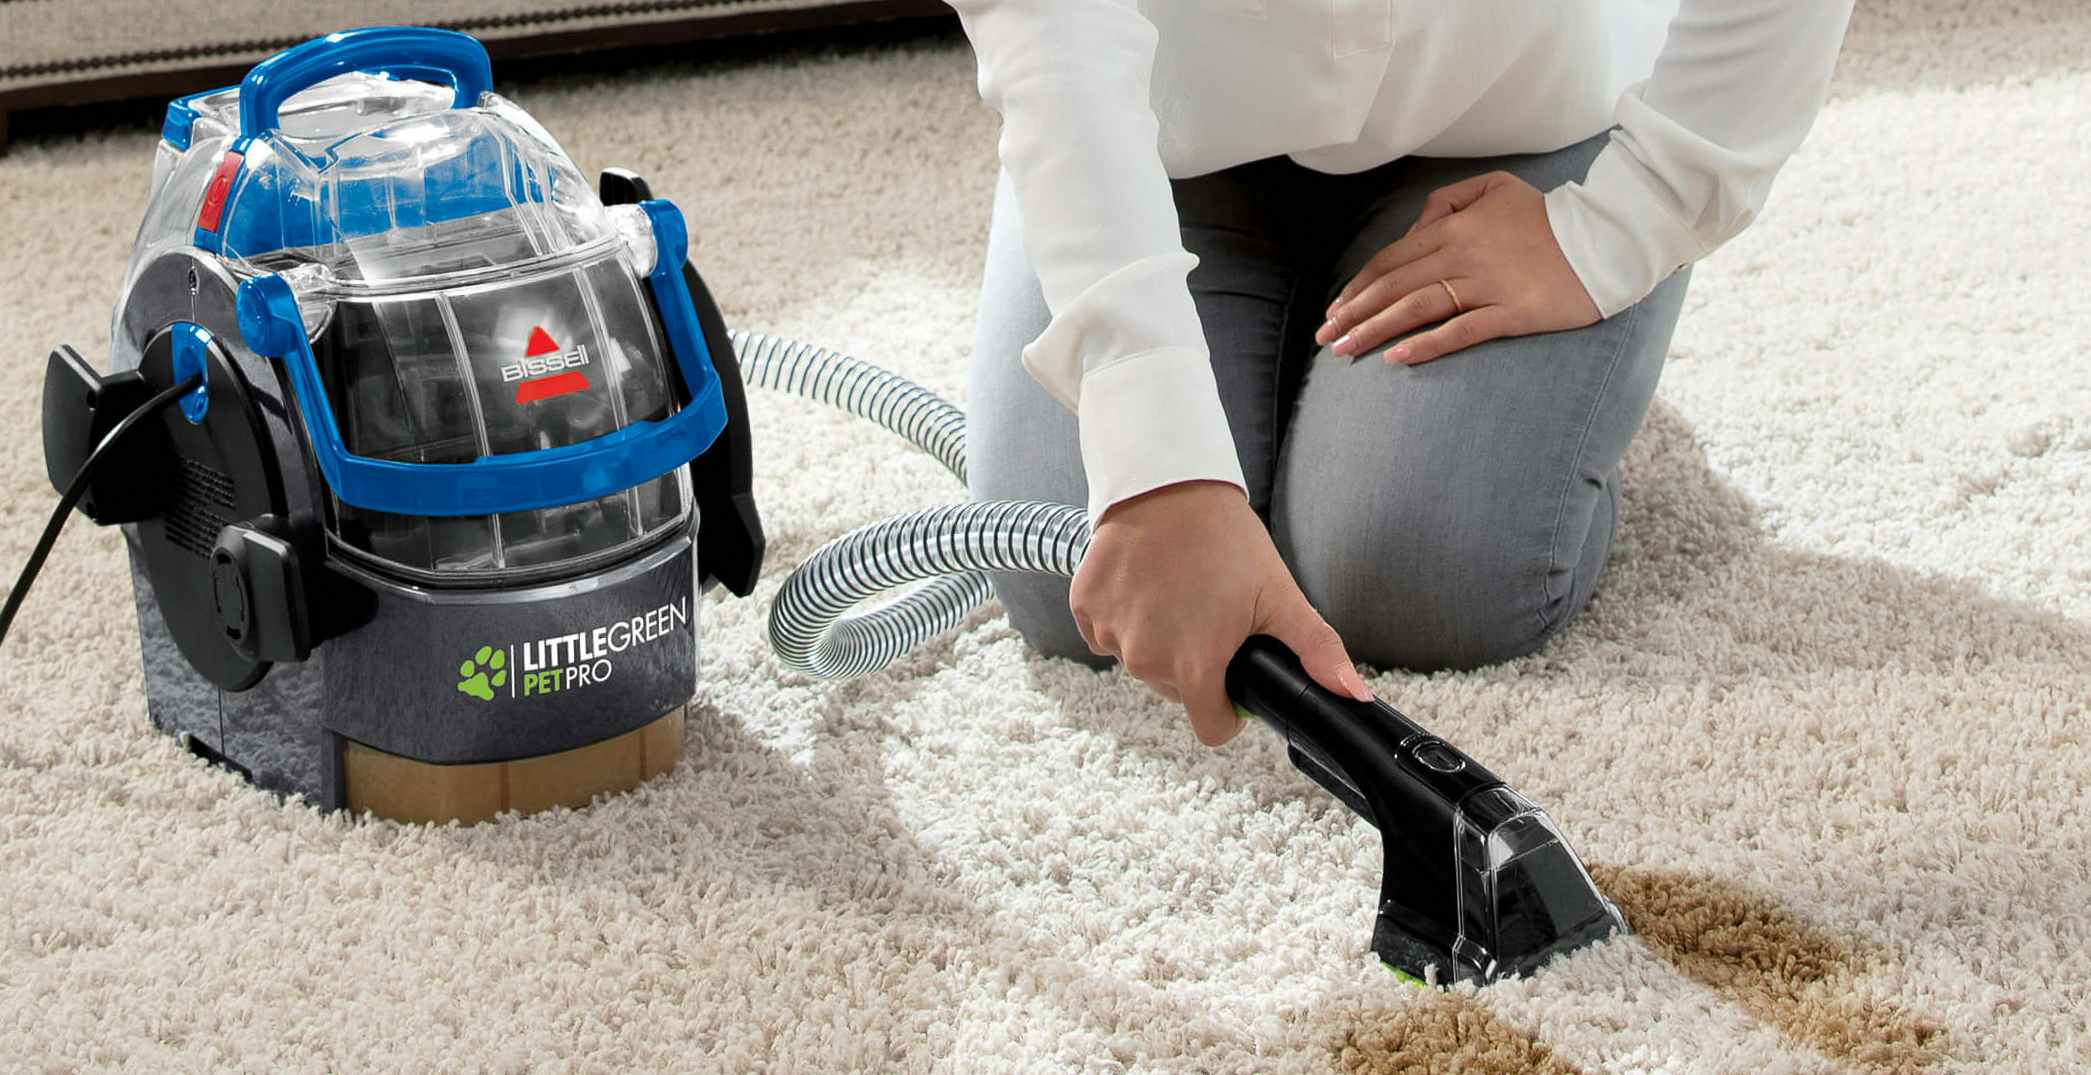 best-carpet-cleaners-for-pets-bissell-little-green-pet-pro